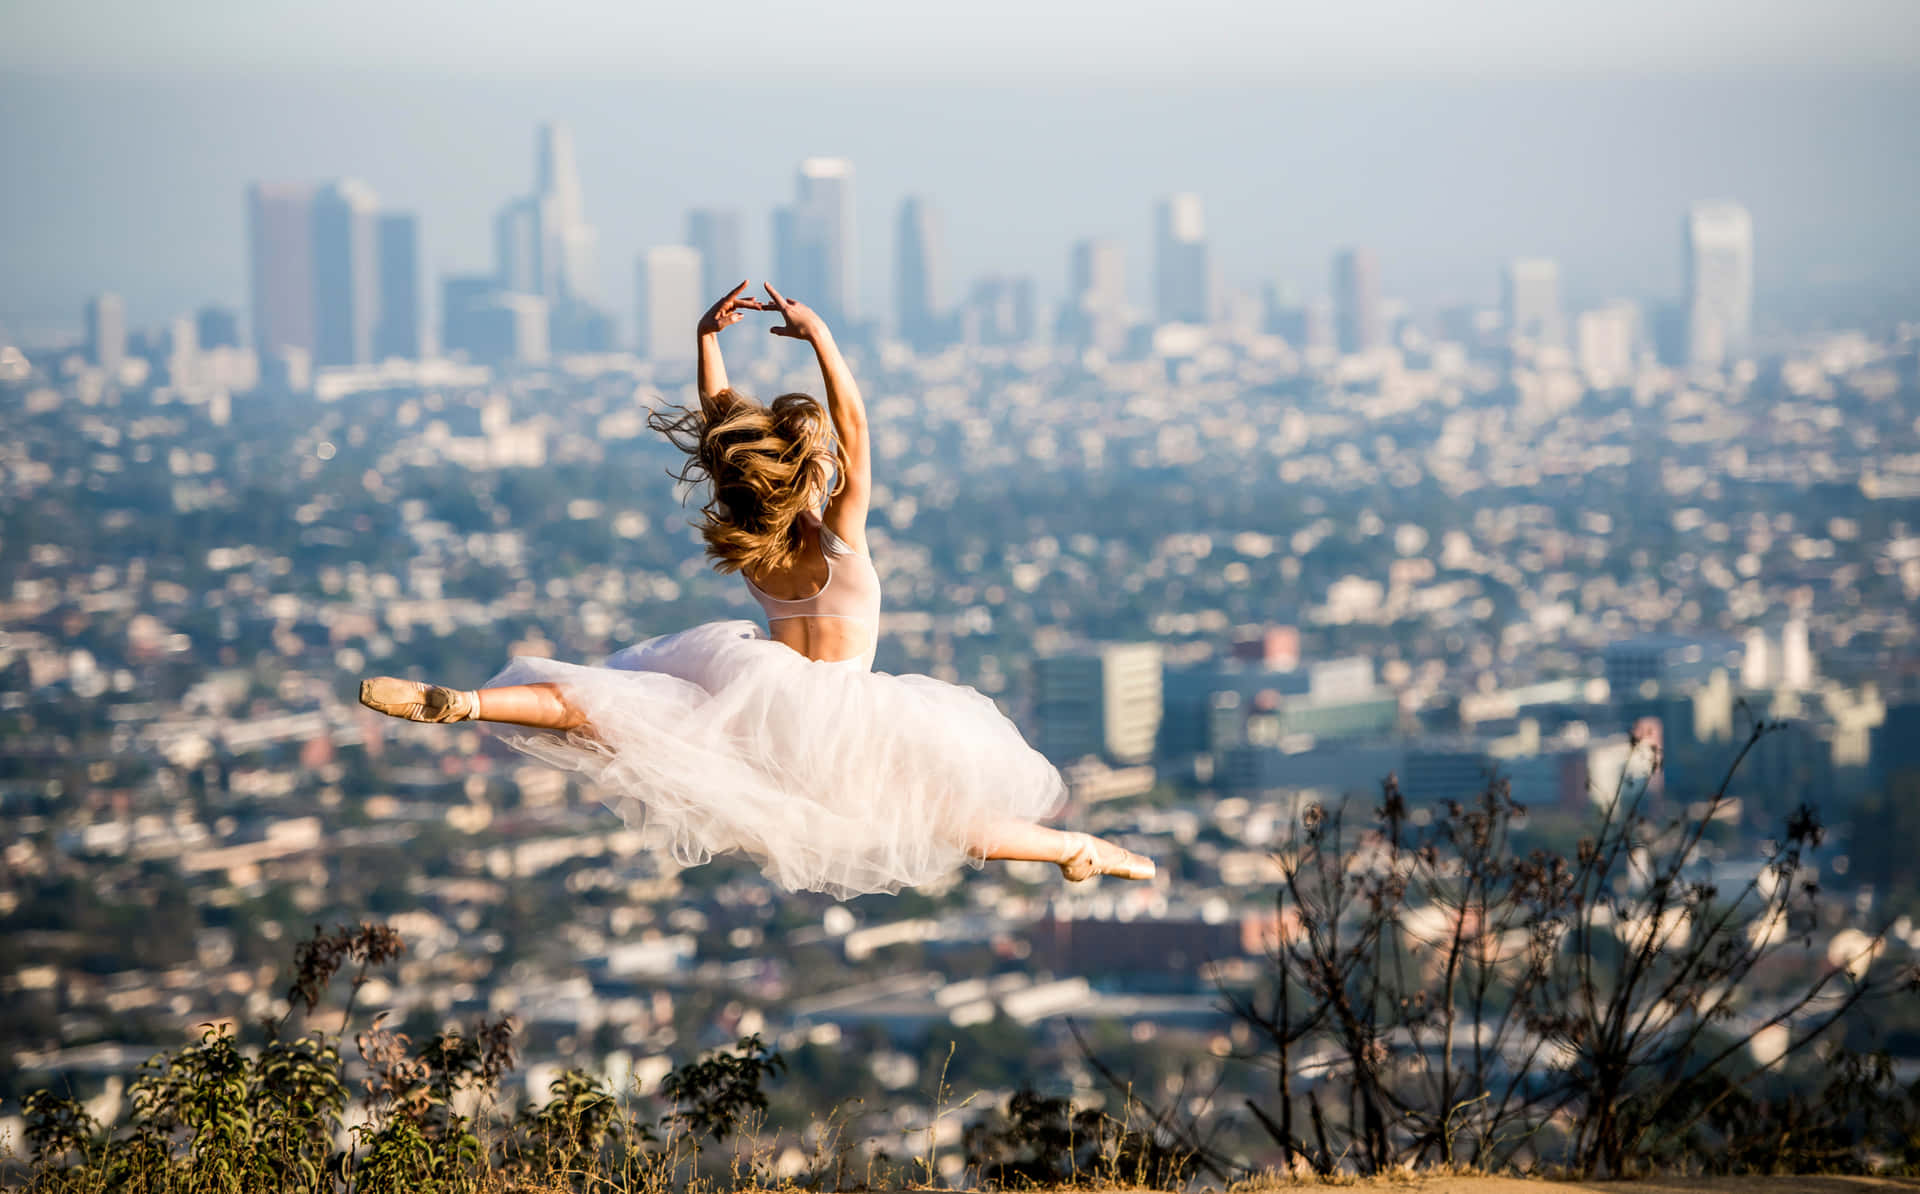 Ballet Background Images HD Pictures and Wallpaper For Free Download   Pngtree